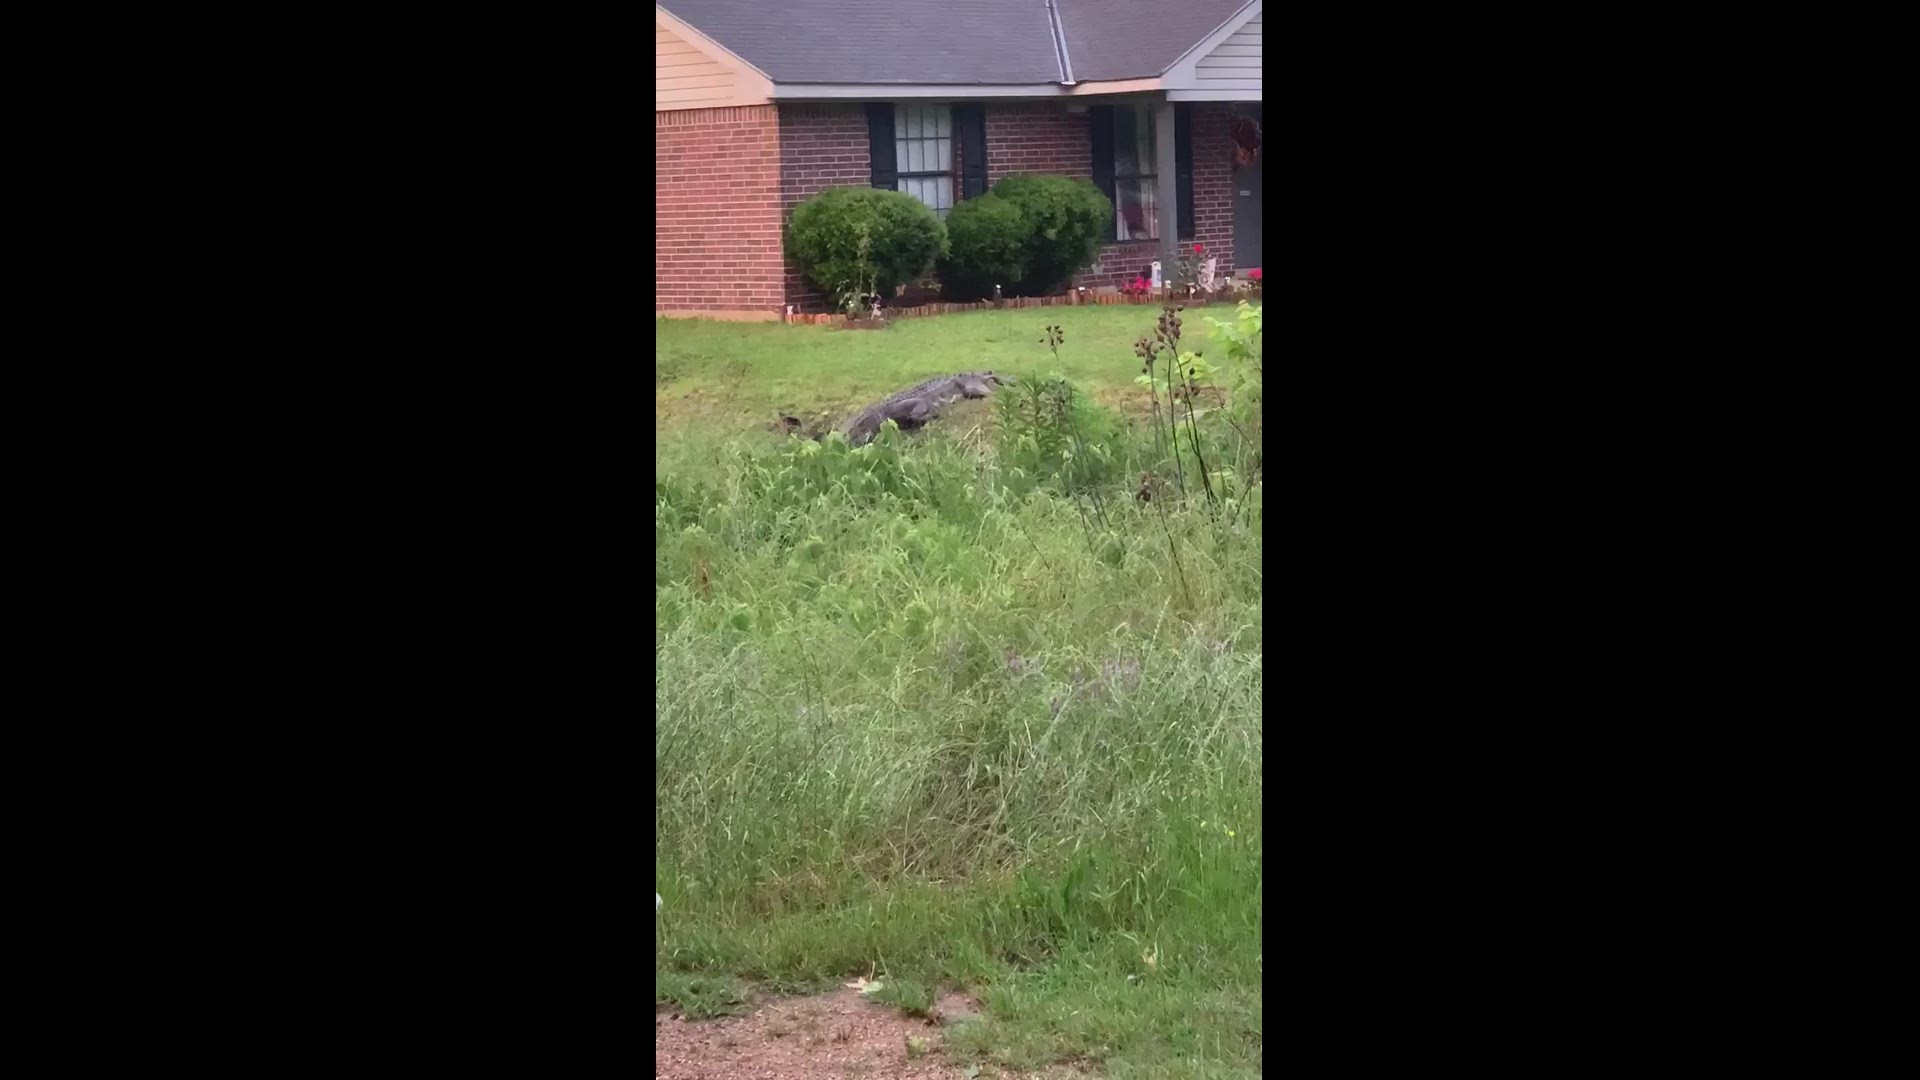 A 5-year-old boy had a close call with an alligator in Bradley, Arkansas on Friday evening.